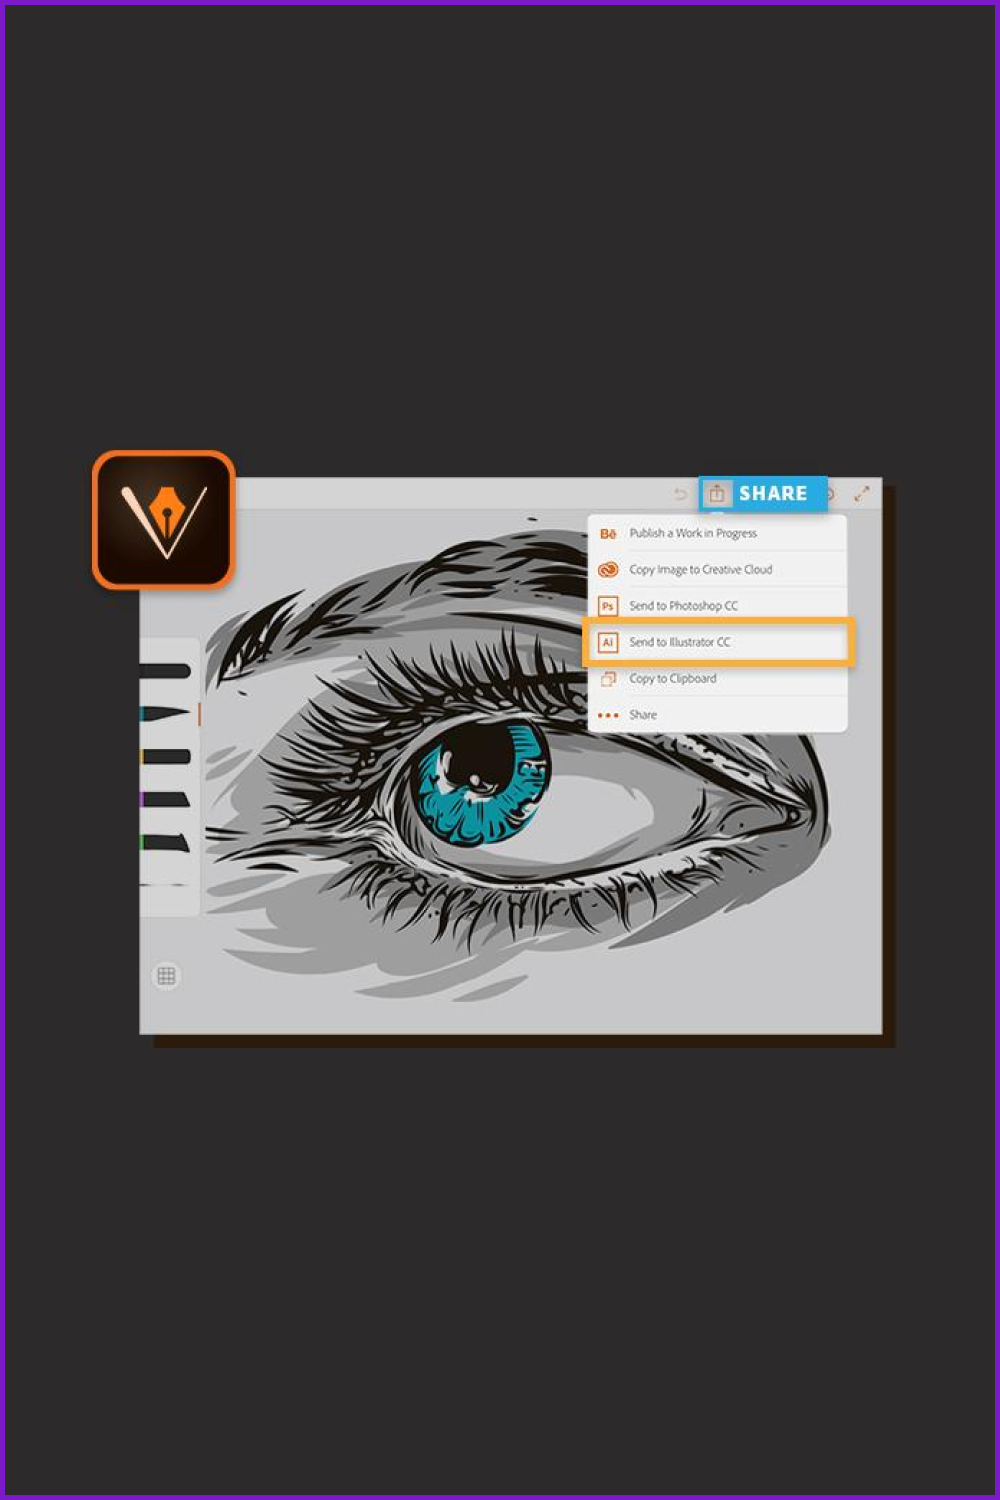 Adobe Illustrator Draw desktop with a painted eye.